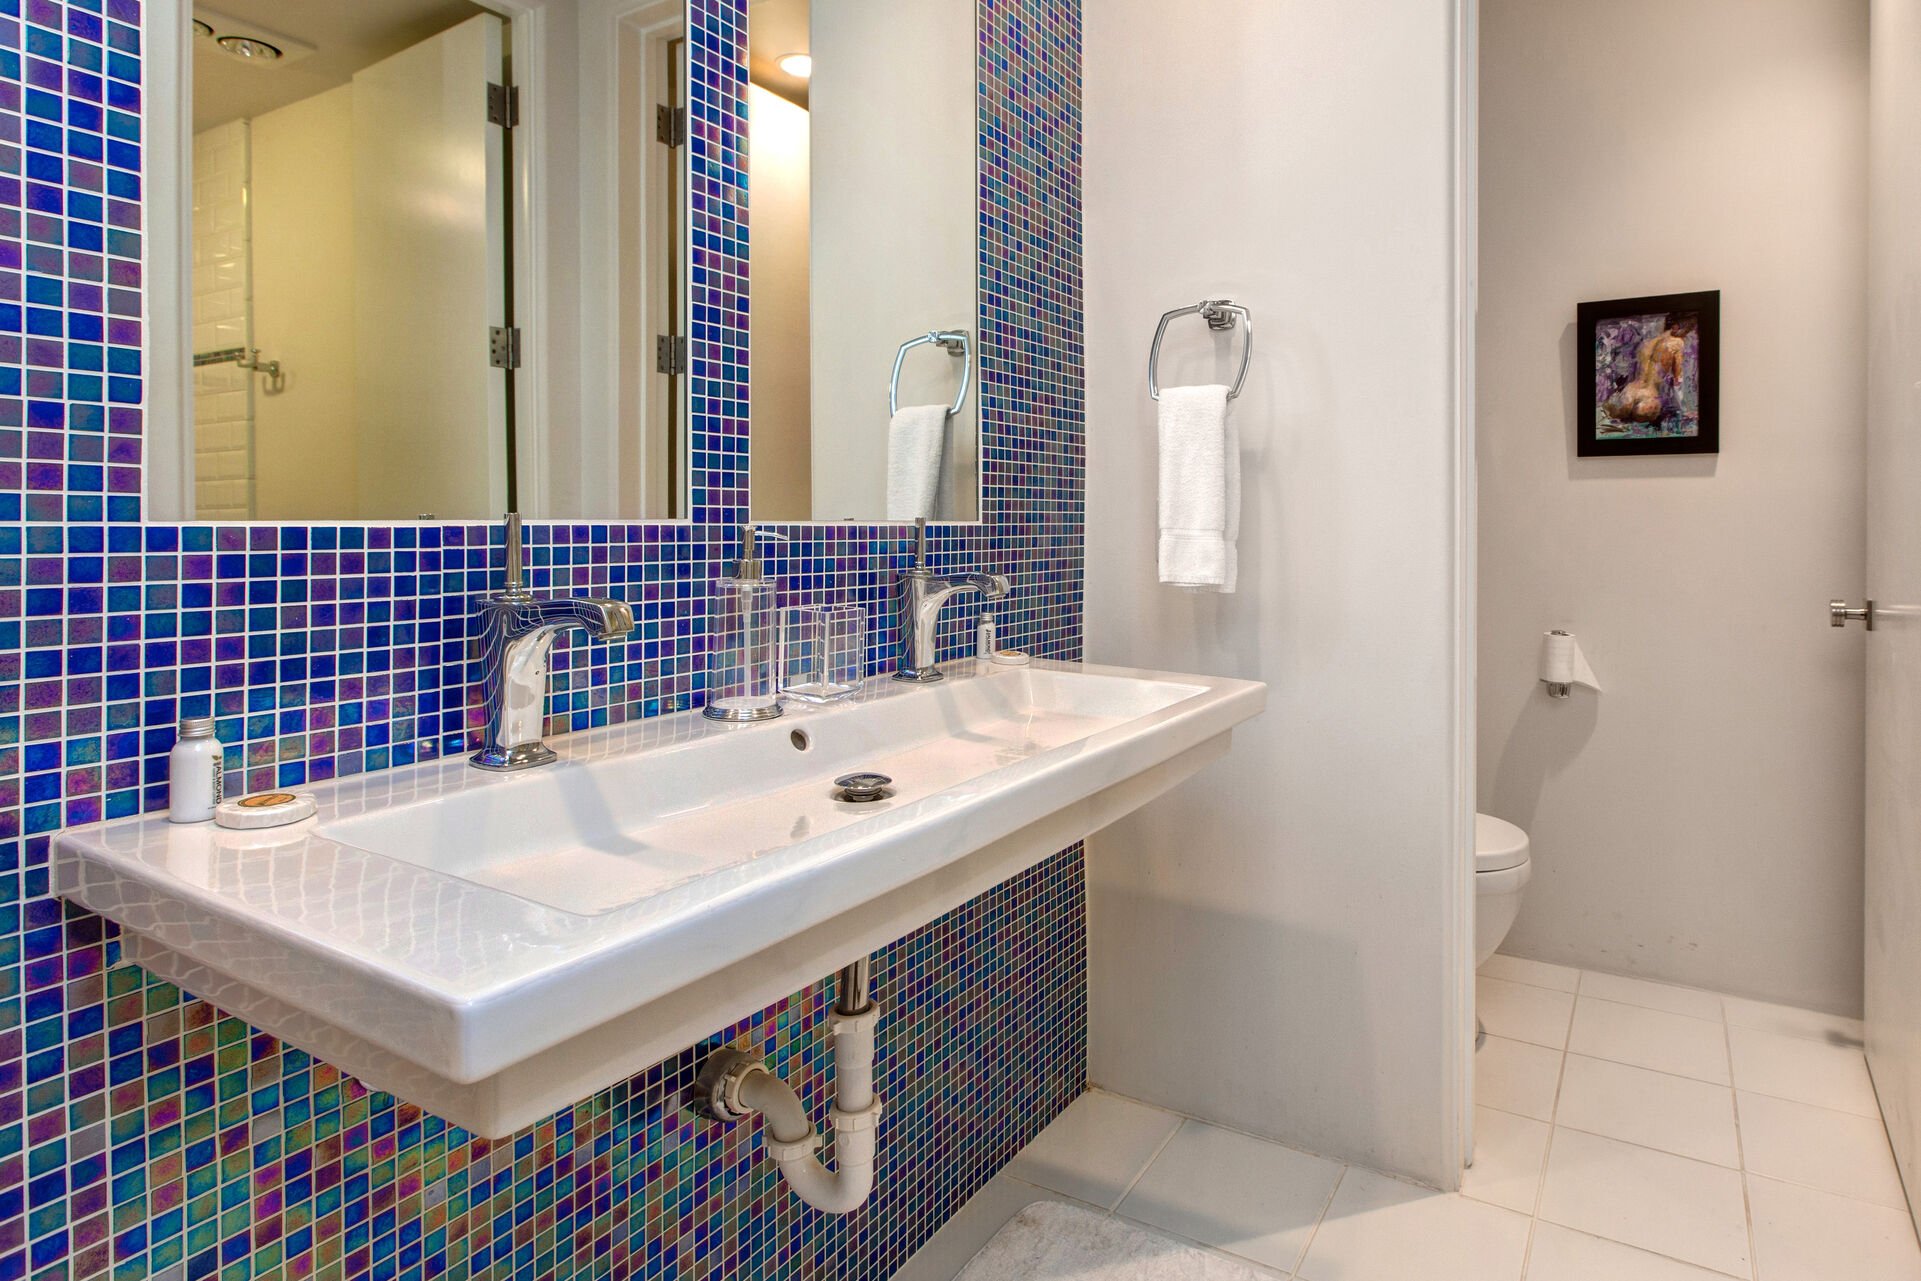 Lower Level Full Shared Bath with a Double Sink, Water Closet and Separate Tub/Shower Combo